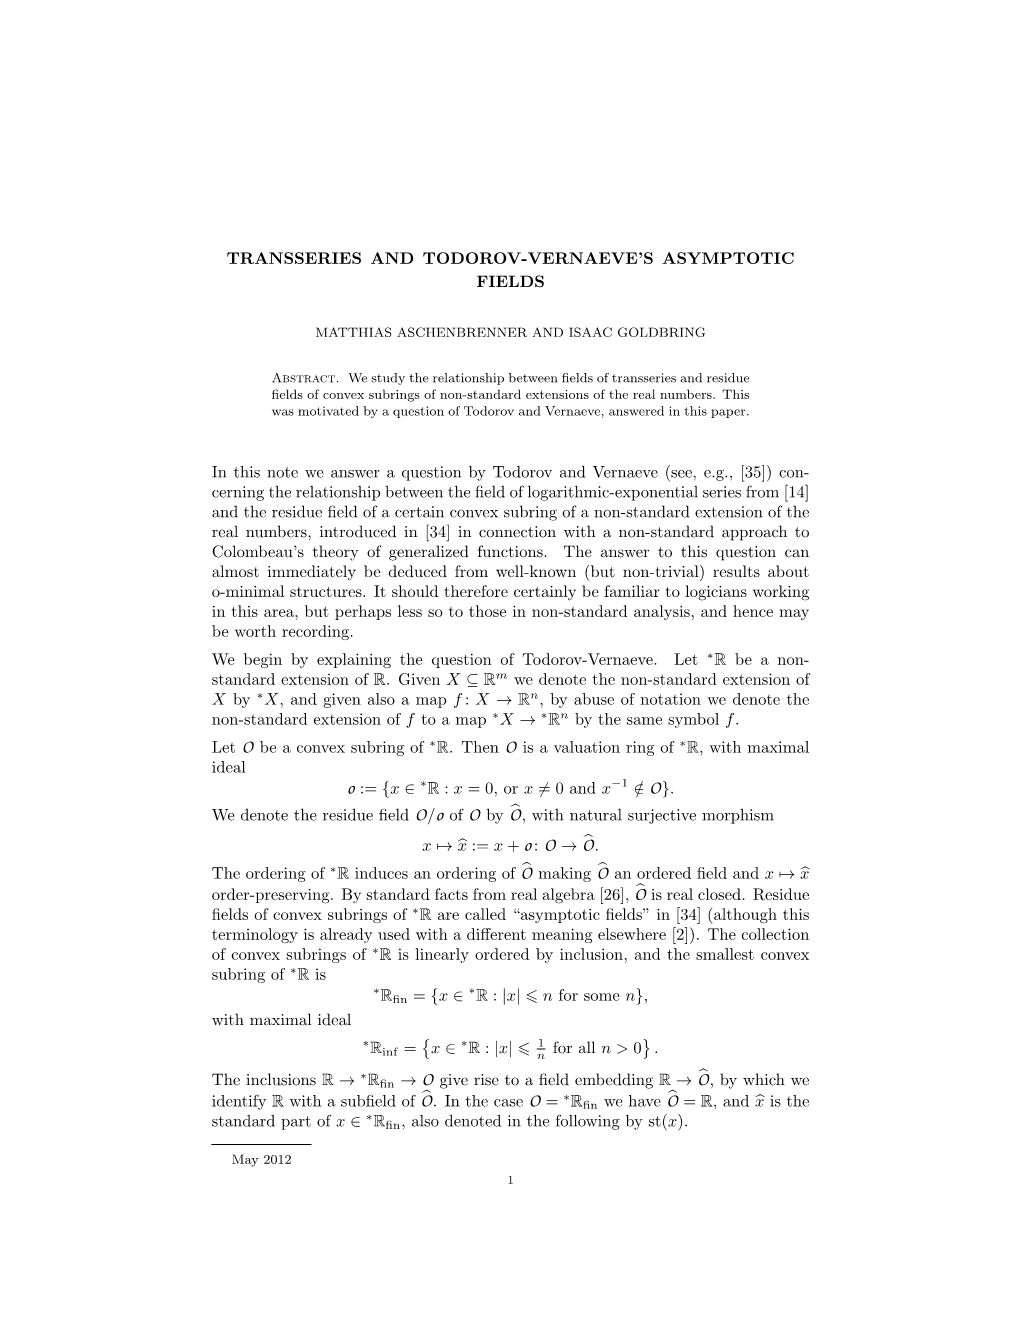 Transseries and Todorov-Vernaeve's Asymptotic Fields